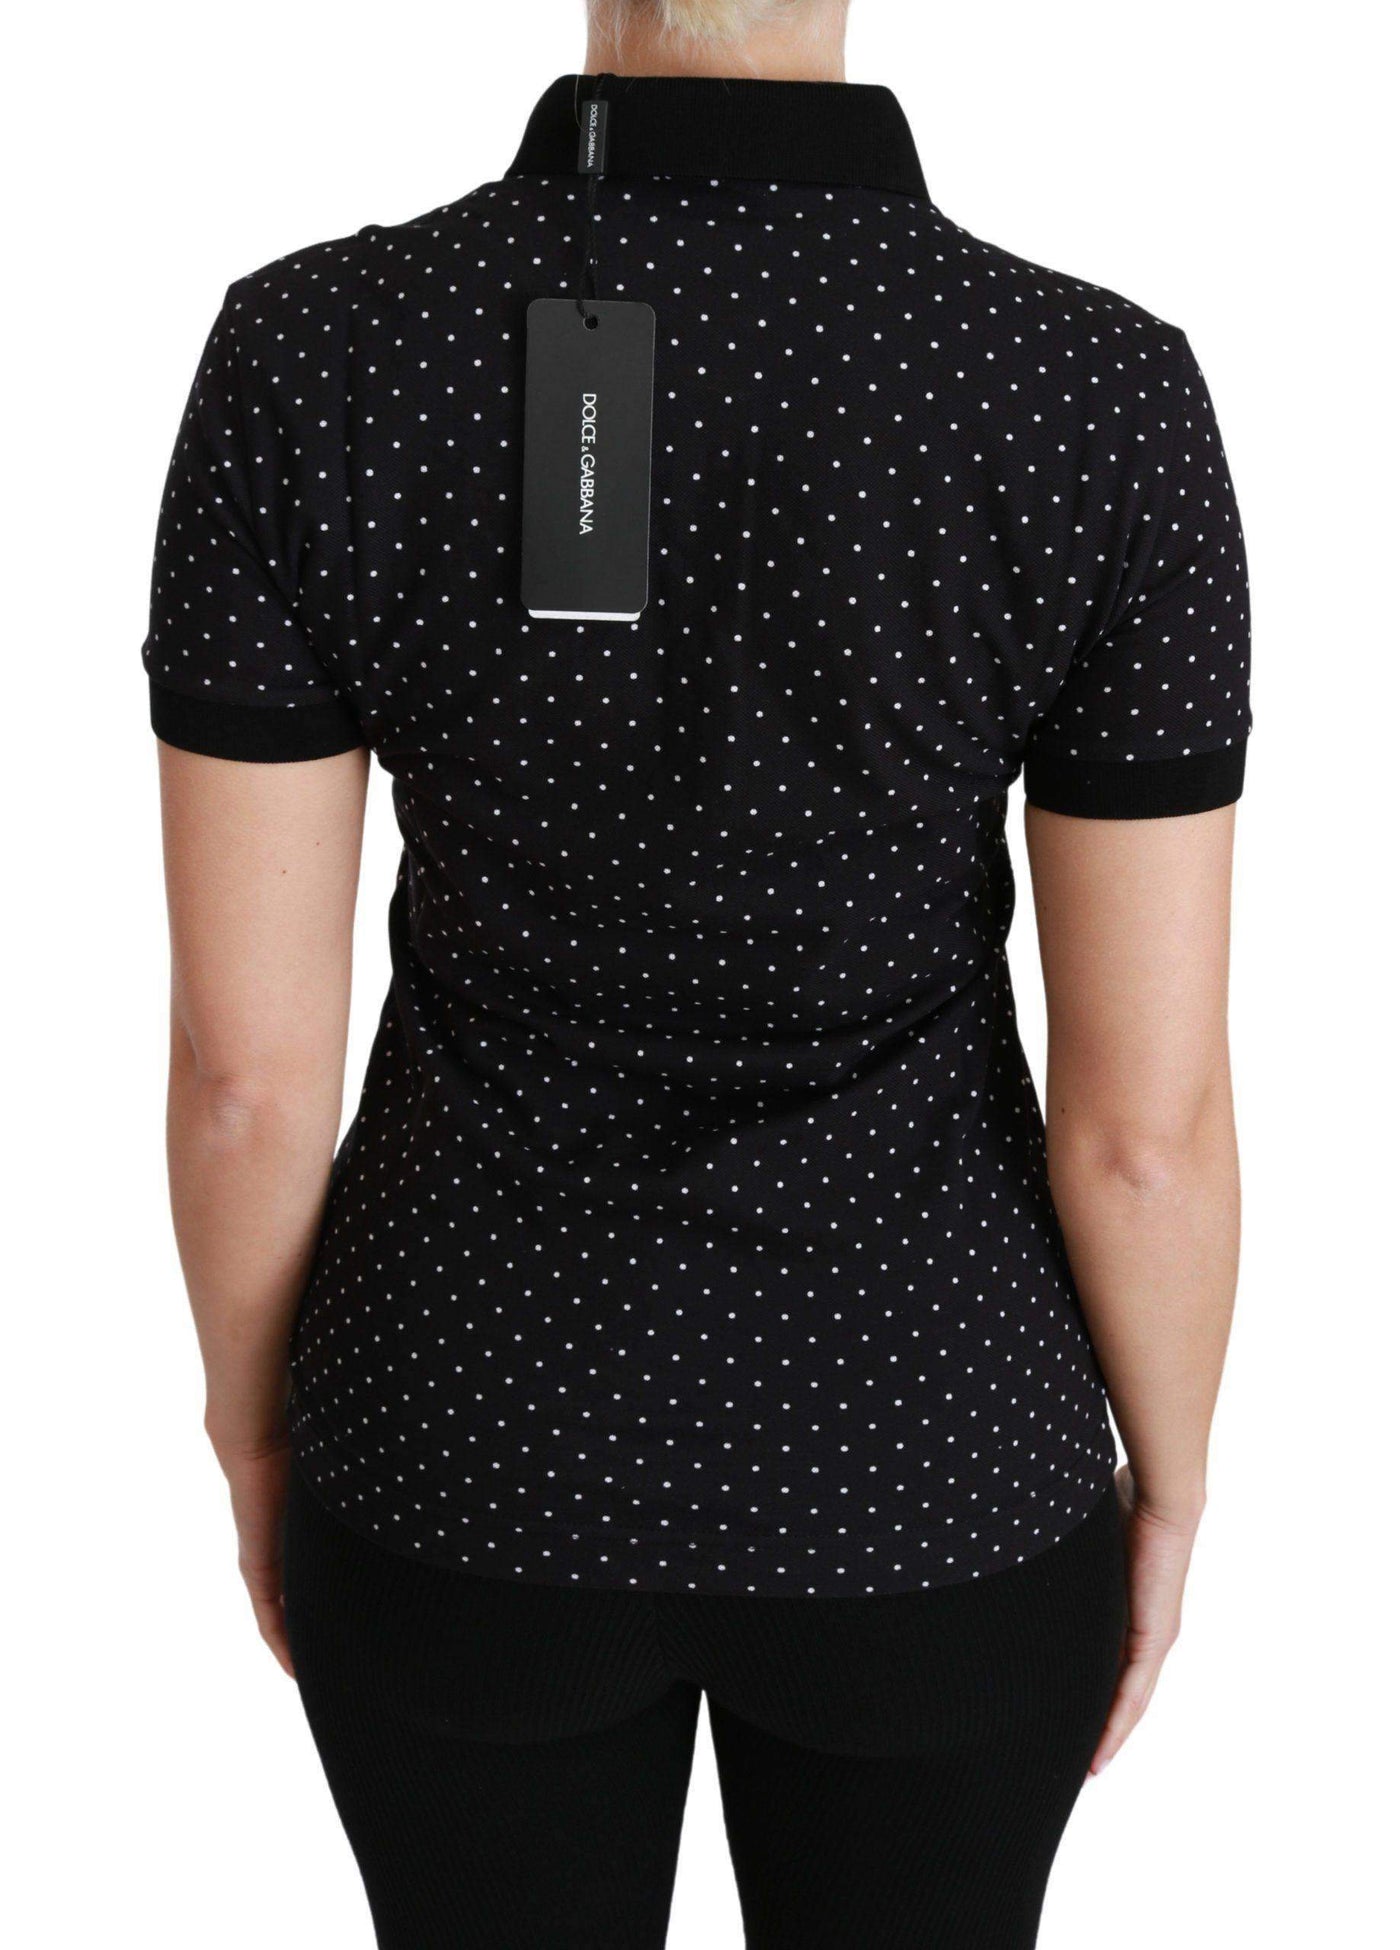 Dolce & Gabbana Black Dotted Collared Polo Shirt Cotton Top #women, Black, Brand_Dolce & Gabbana, Catch, Dolce & Gabbana, feed-agegroup-adult, feed-color-black, feed-gender-female, feed-size-IT36 | XS, feed-size-IT38|XS, feed-size-IT42|M, Gender_Women, IT36 | XS, IT38|XS, IT42|M, Kogan, Tops & T-Shirts - Women - Clothing, Women - New Arrivals at SEYMAYKA